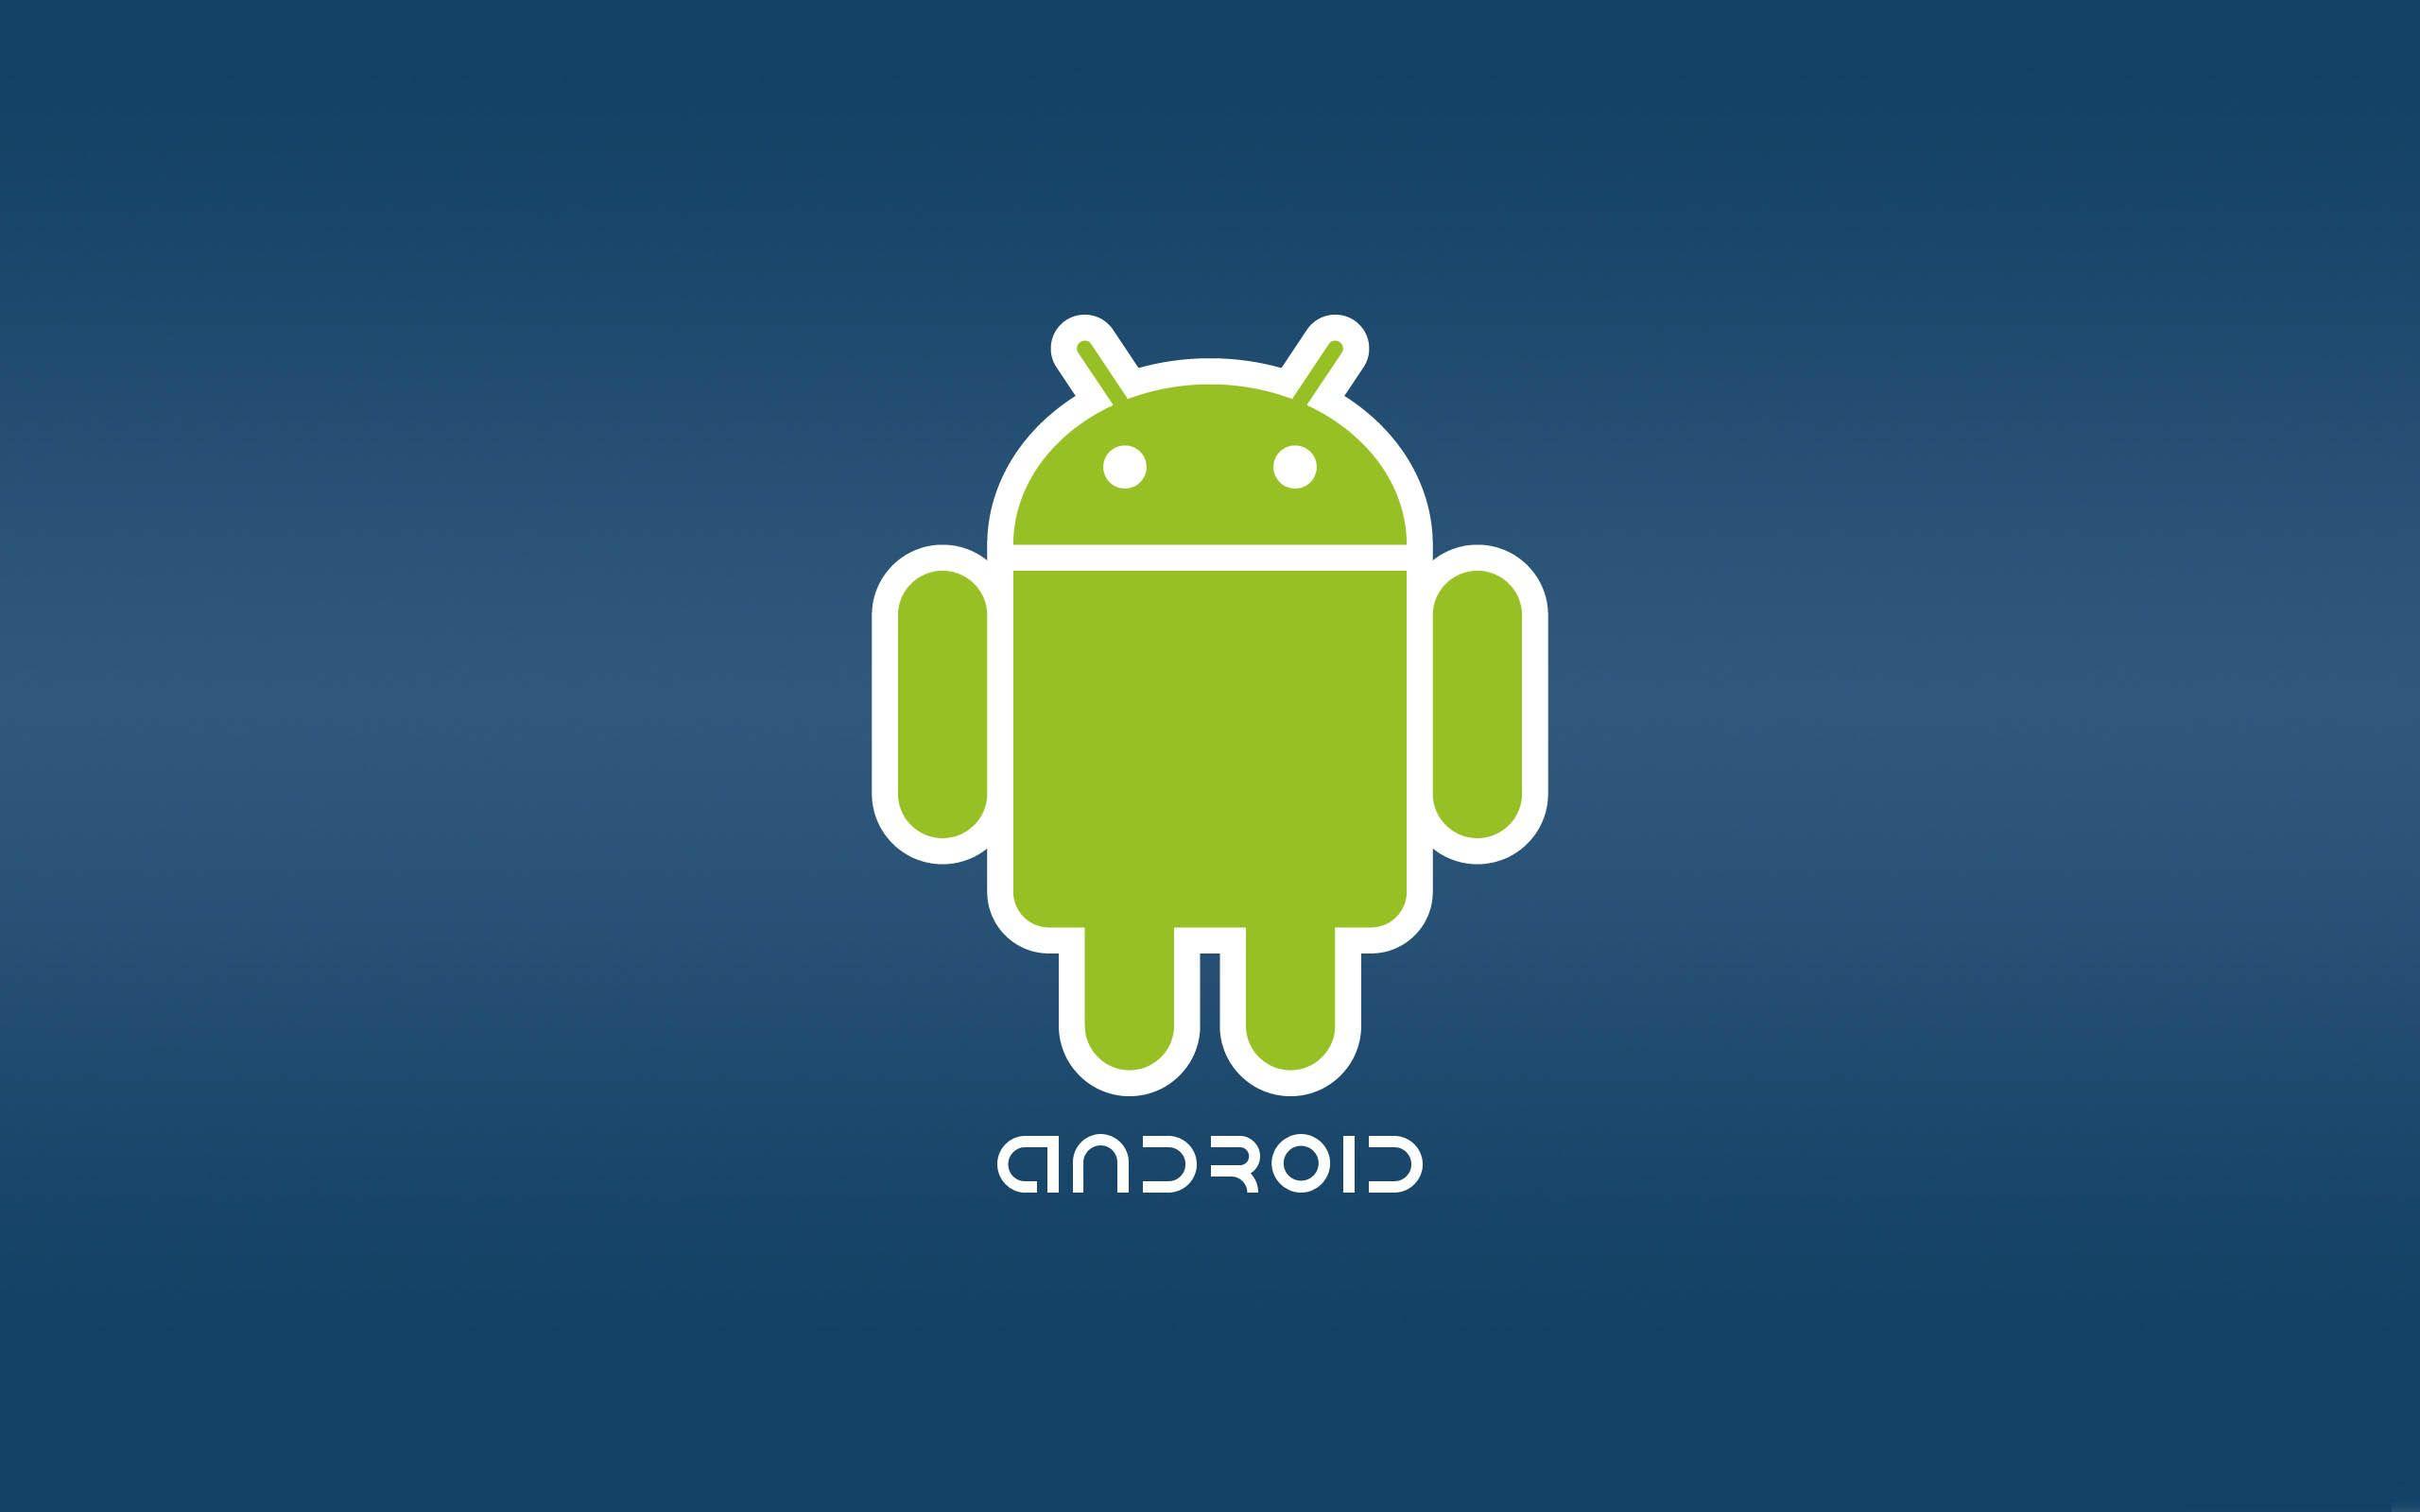 Android Icon wallpaper